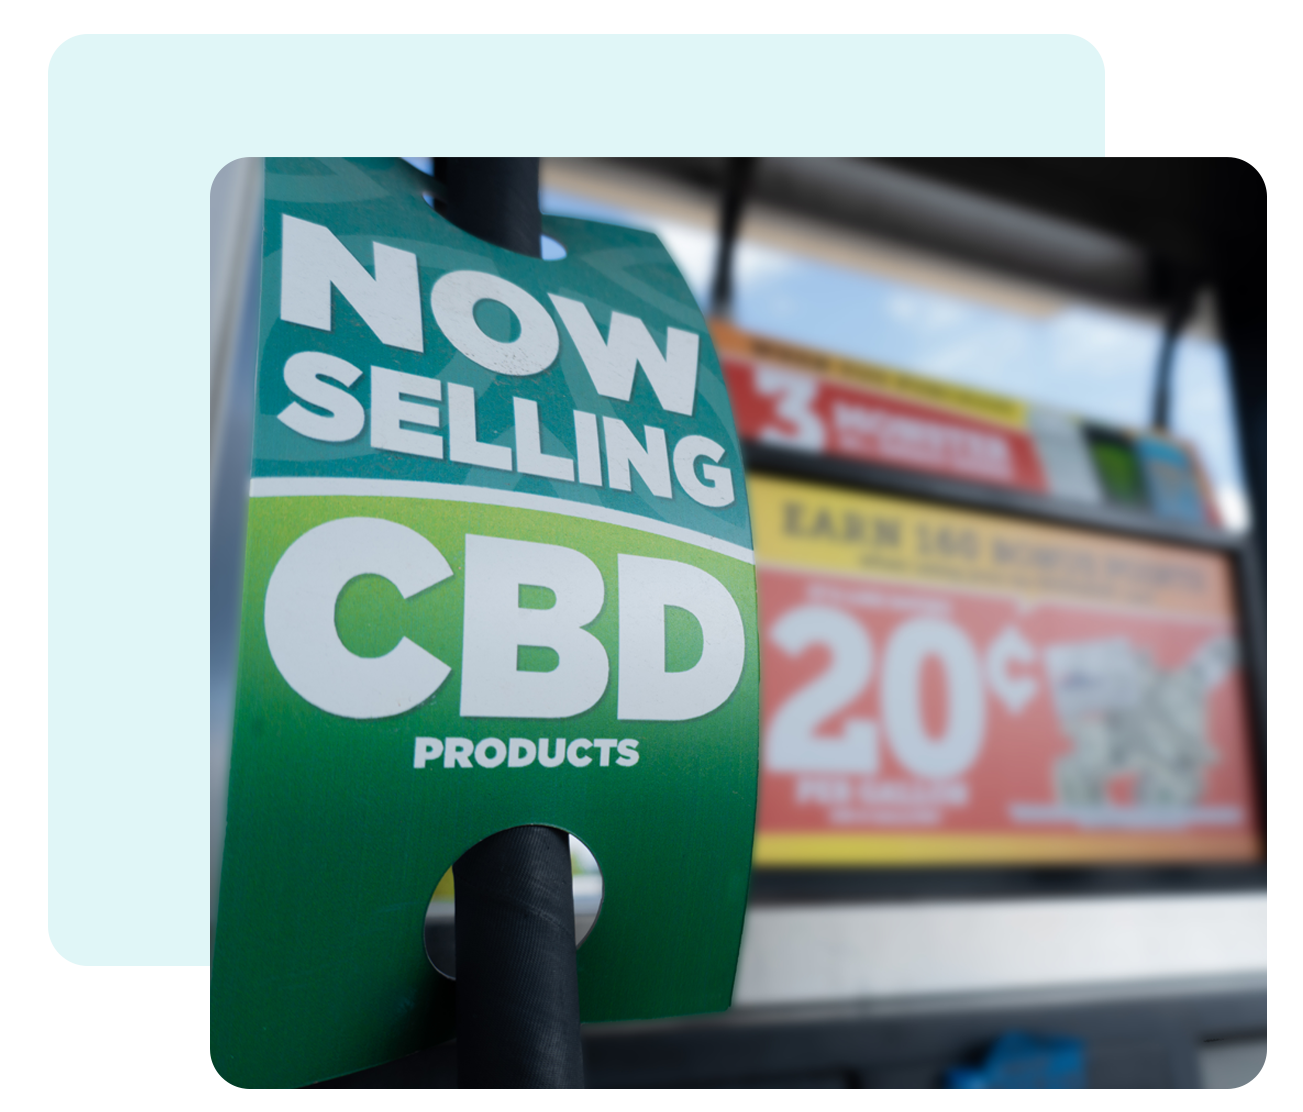 Now Selling CBD sign